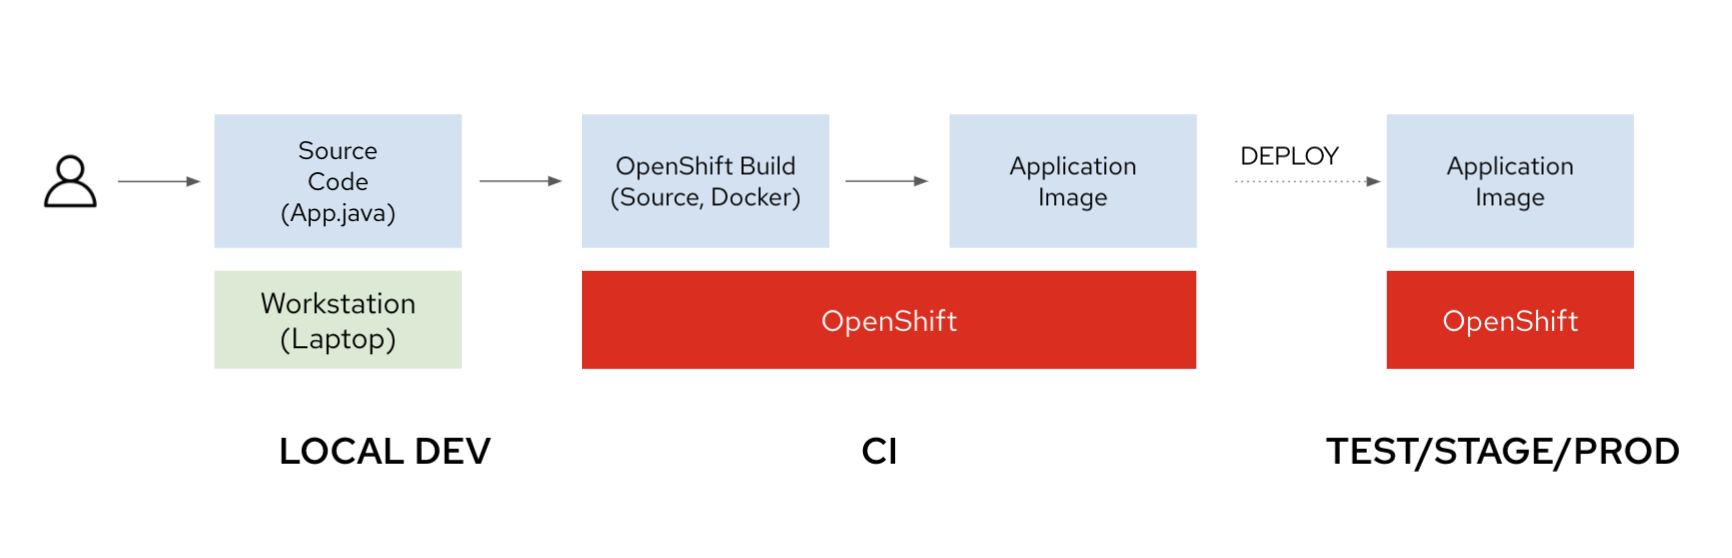 Building a container image using OpenShift BuildConfig API 